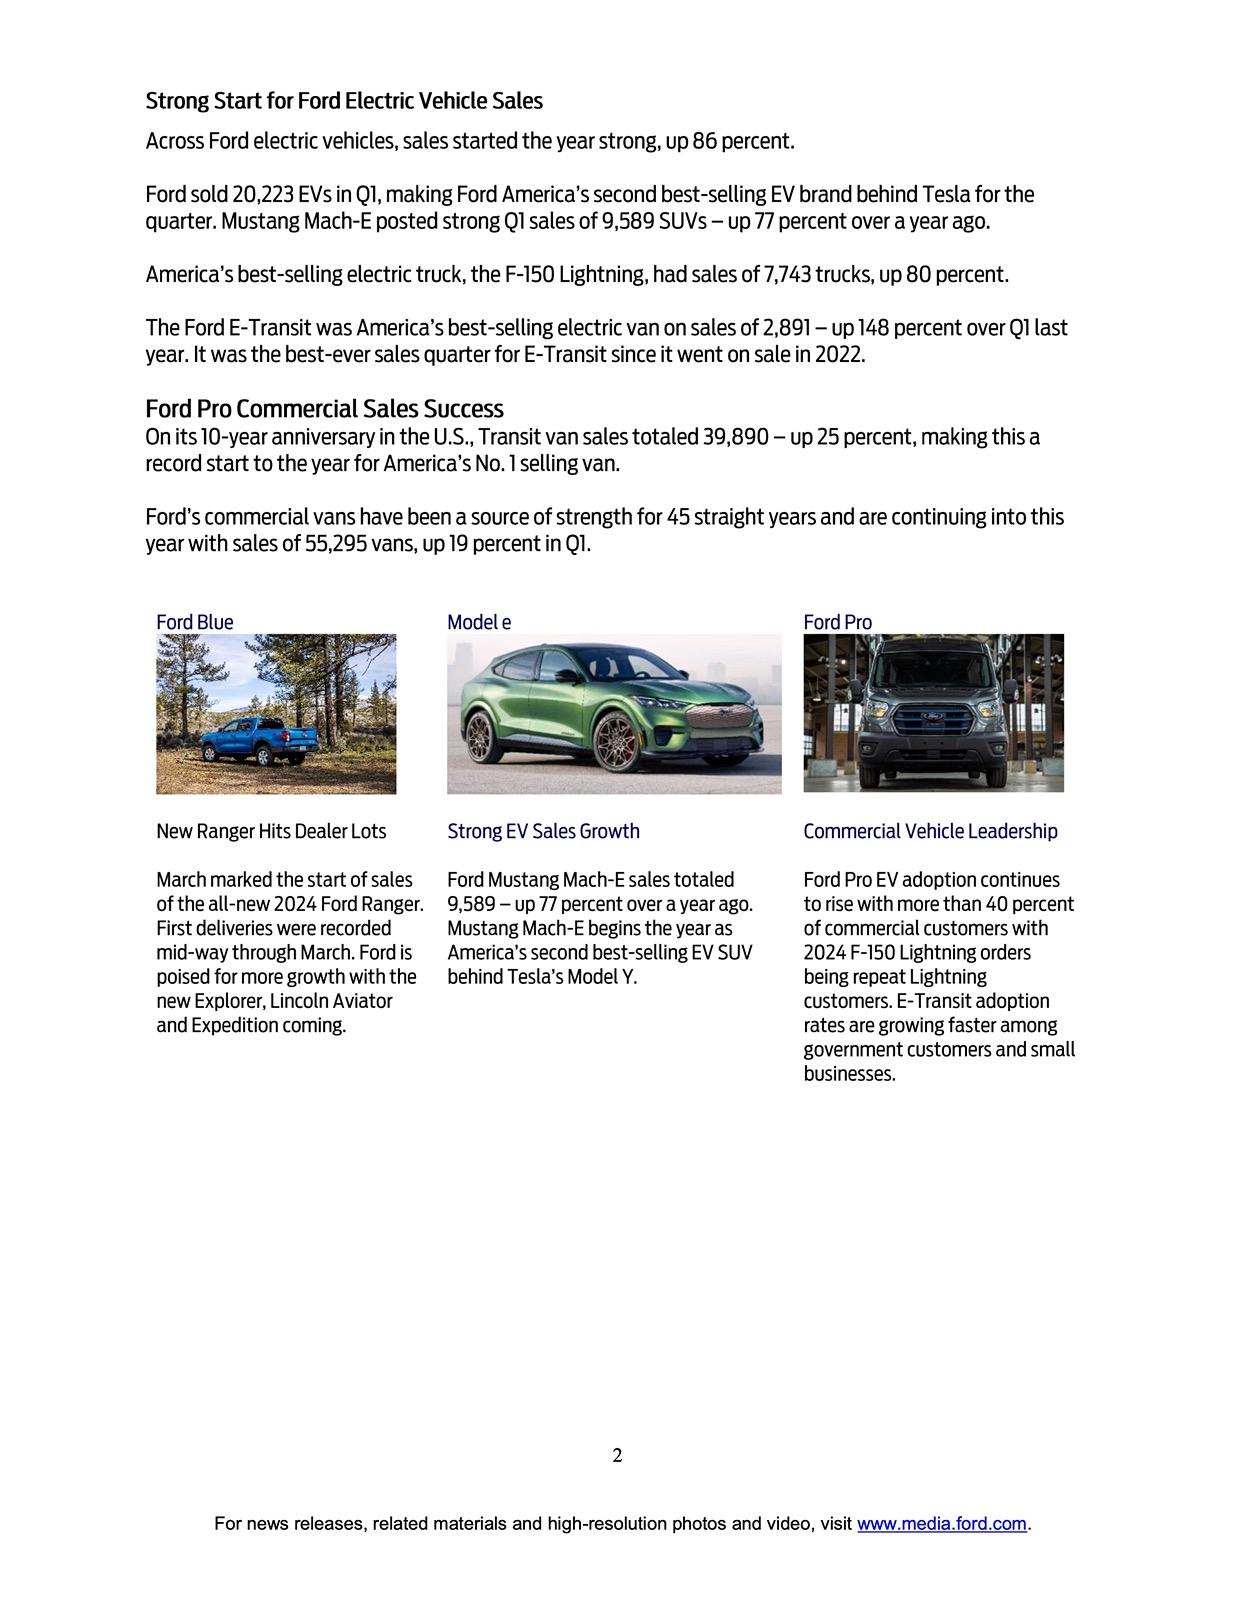 Ford F-150 Lightning F-150 Lightning March 2024 & Q1 Sales & Production: 80% Quarterly Increase YoY page 2